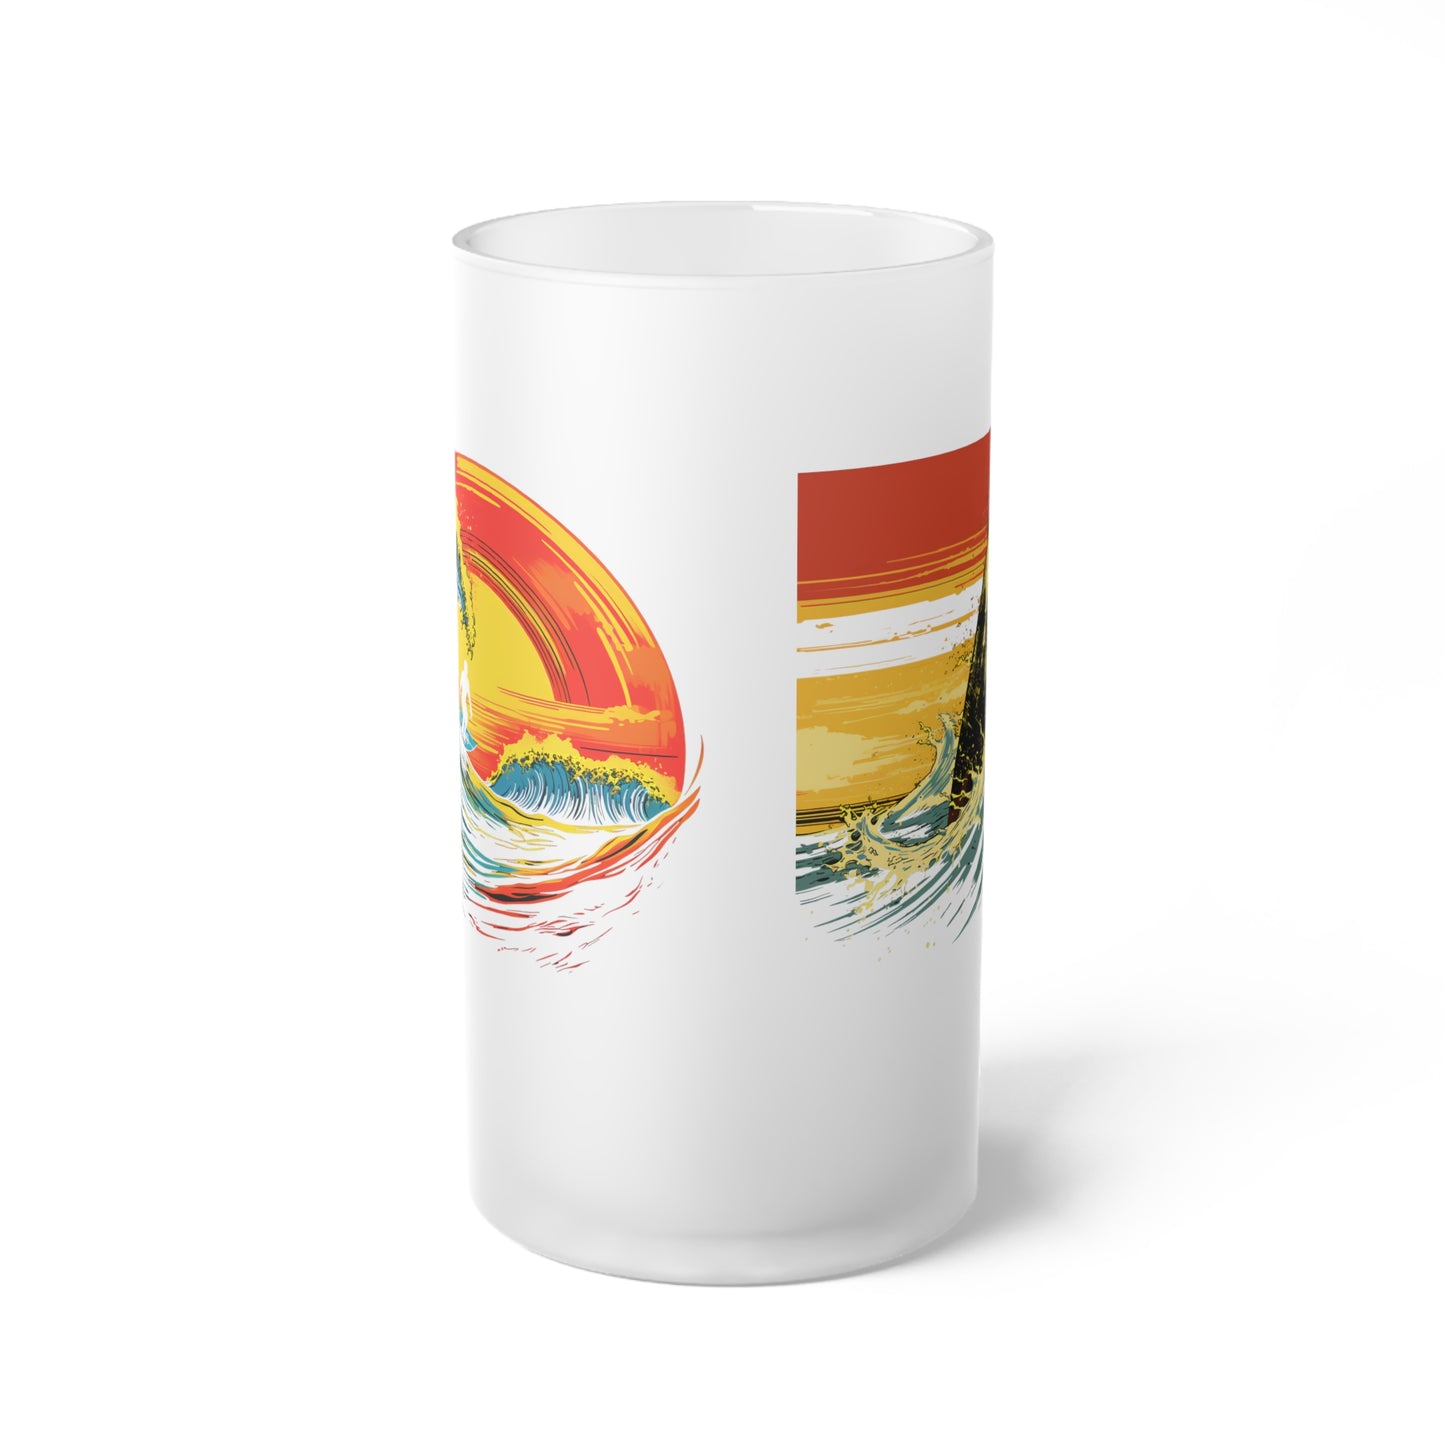 Frosted Glass Beer Mug - Classic Surreal Surfing, 2 Designs on 1 - Waves 066